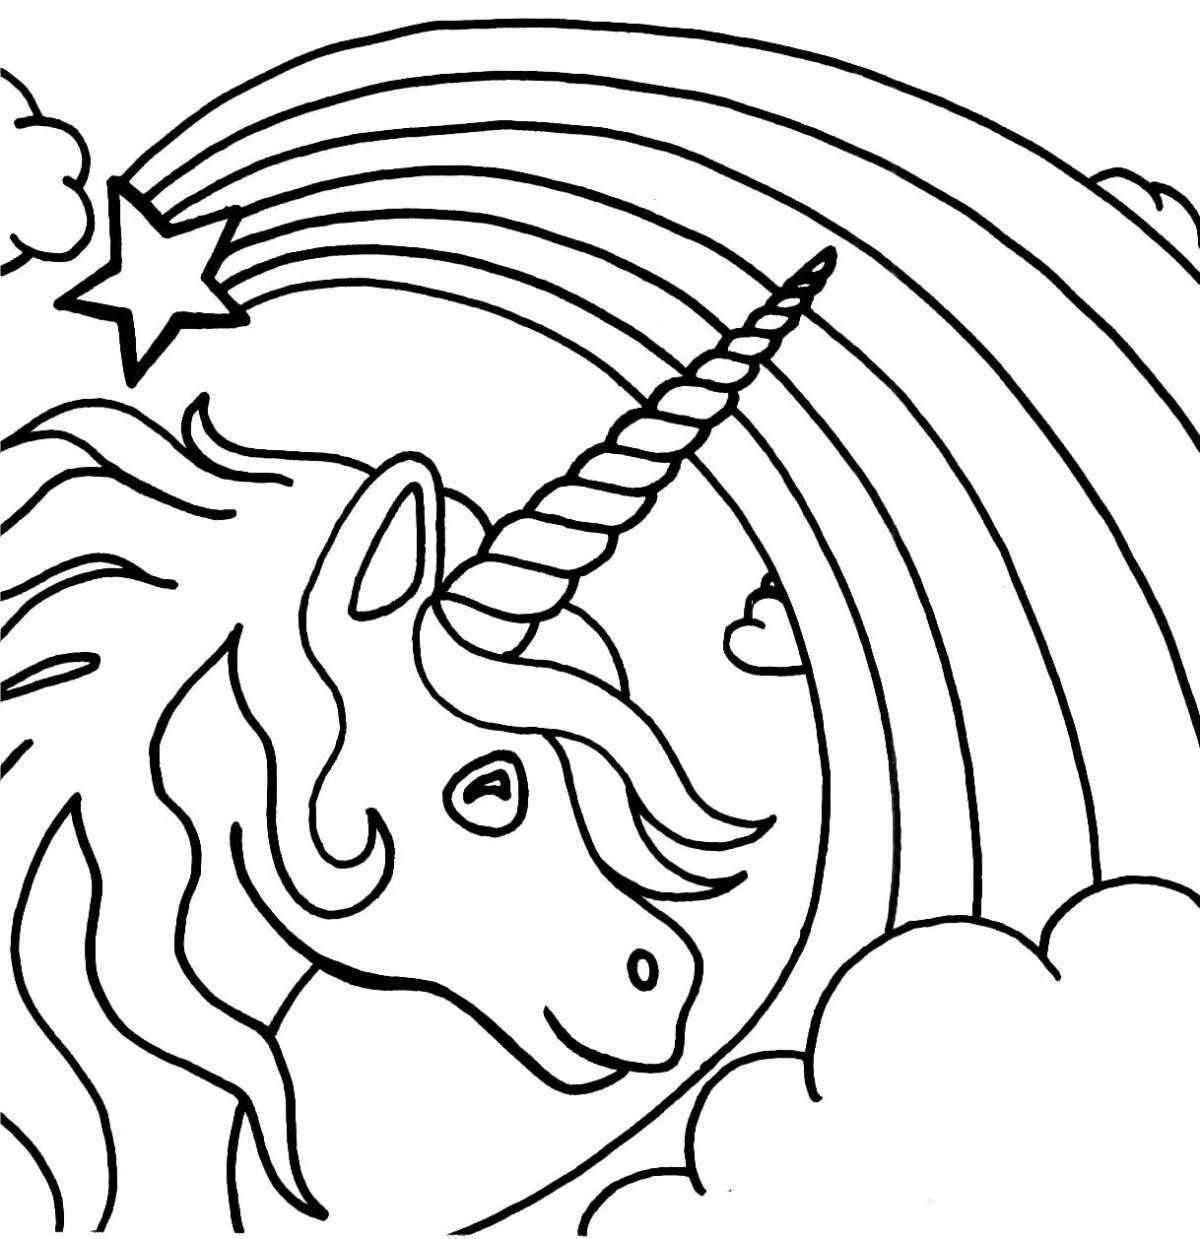 Amazing coloring picture of a unicorn